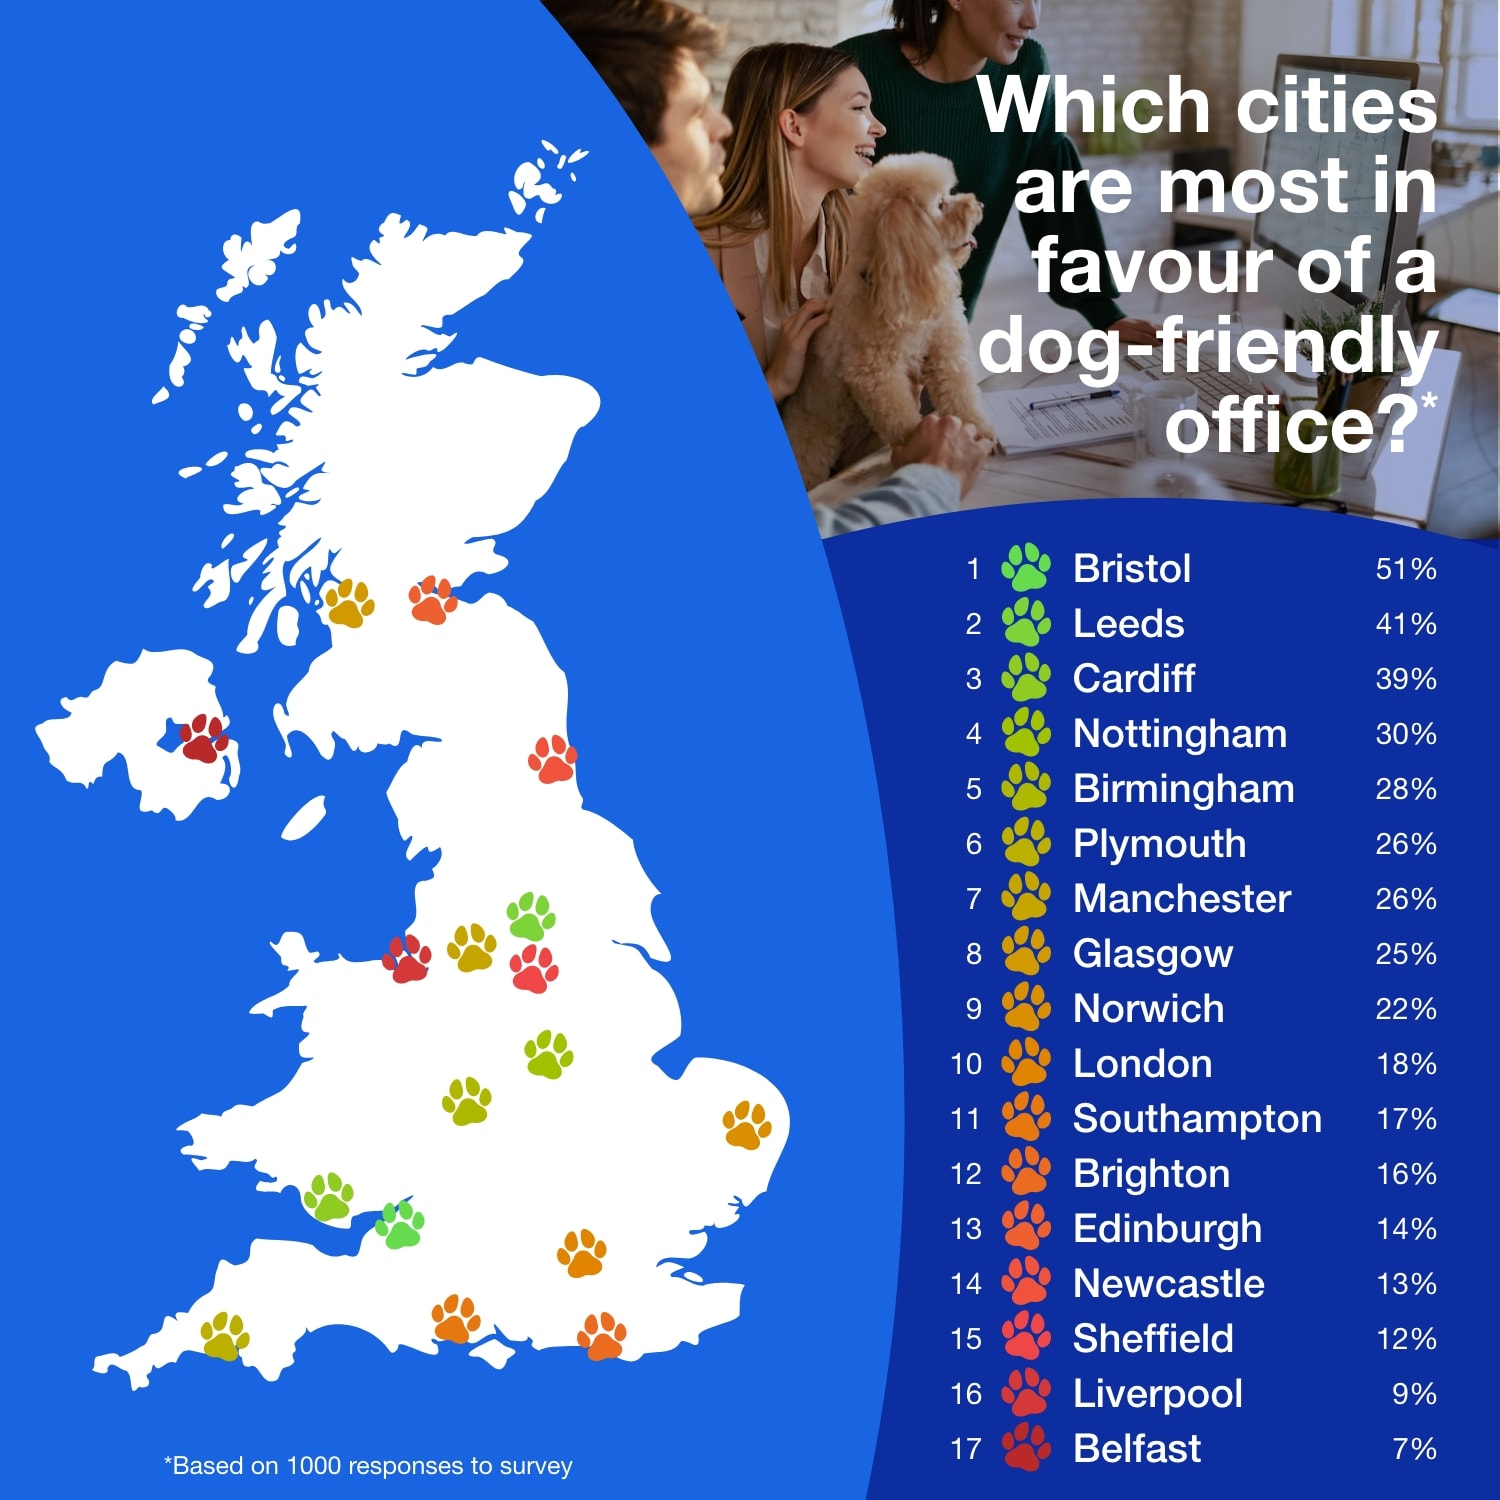 Infographic showing a map of the top 17 cities which are most in favour of a dog-friendly office